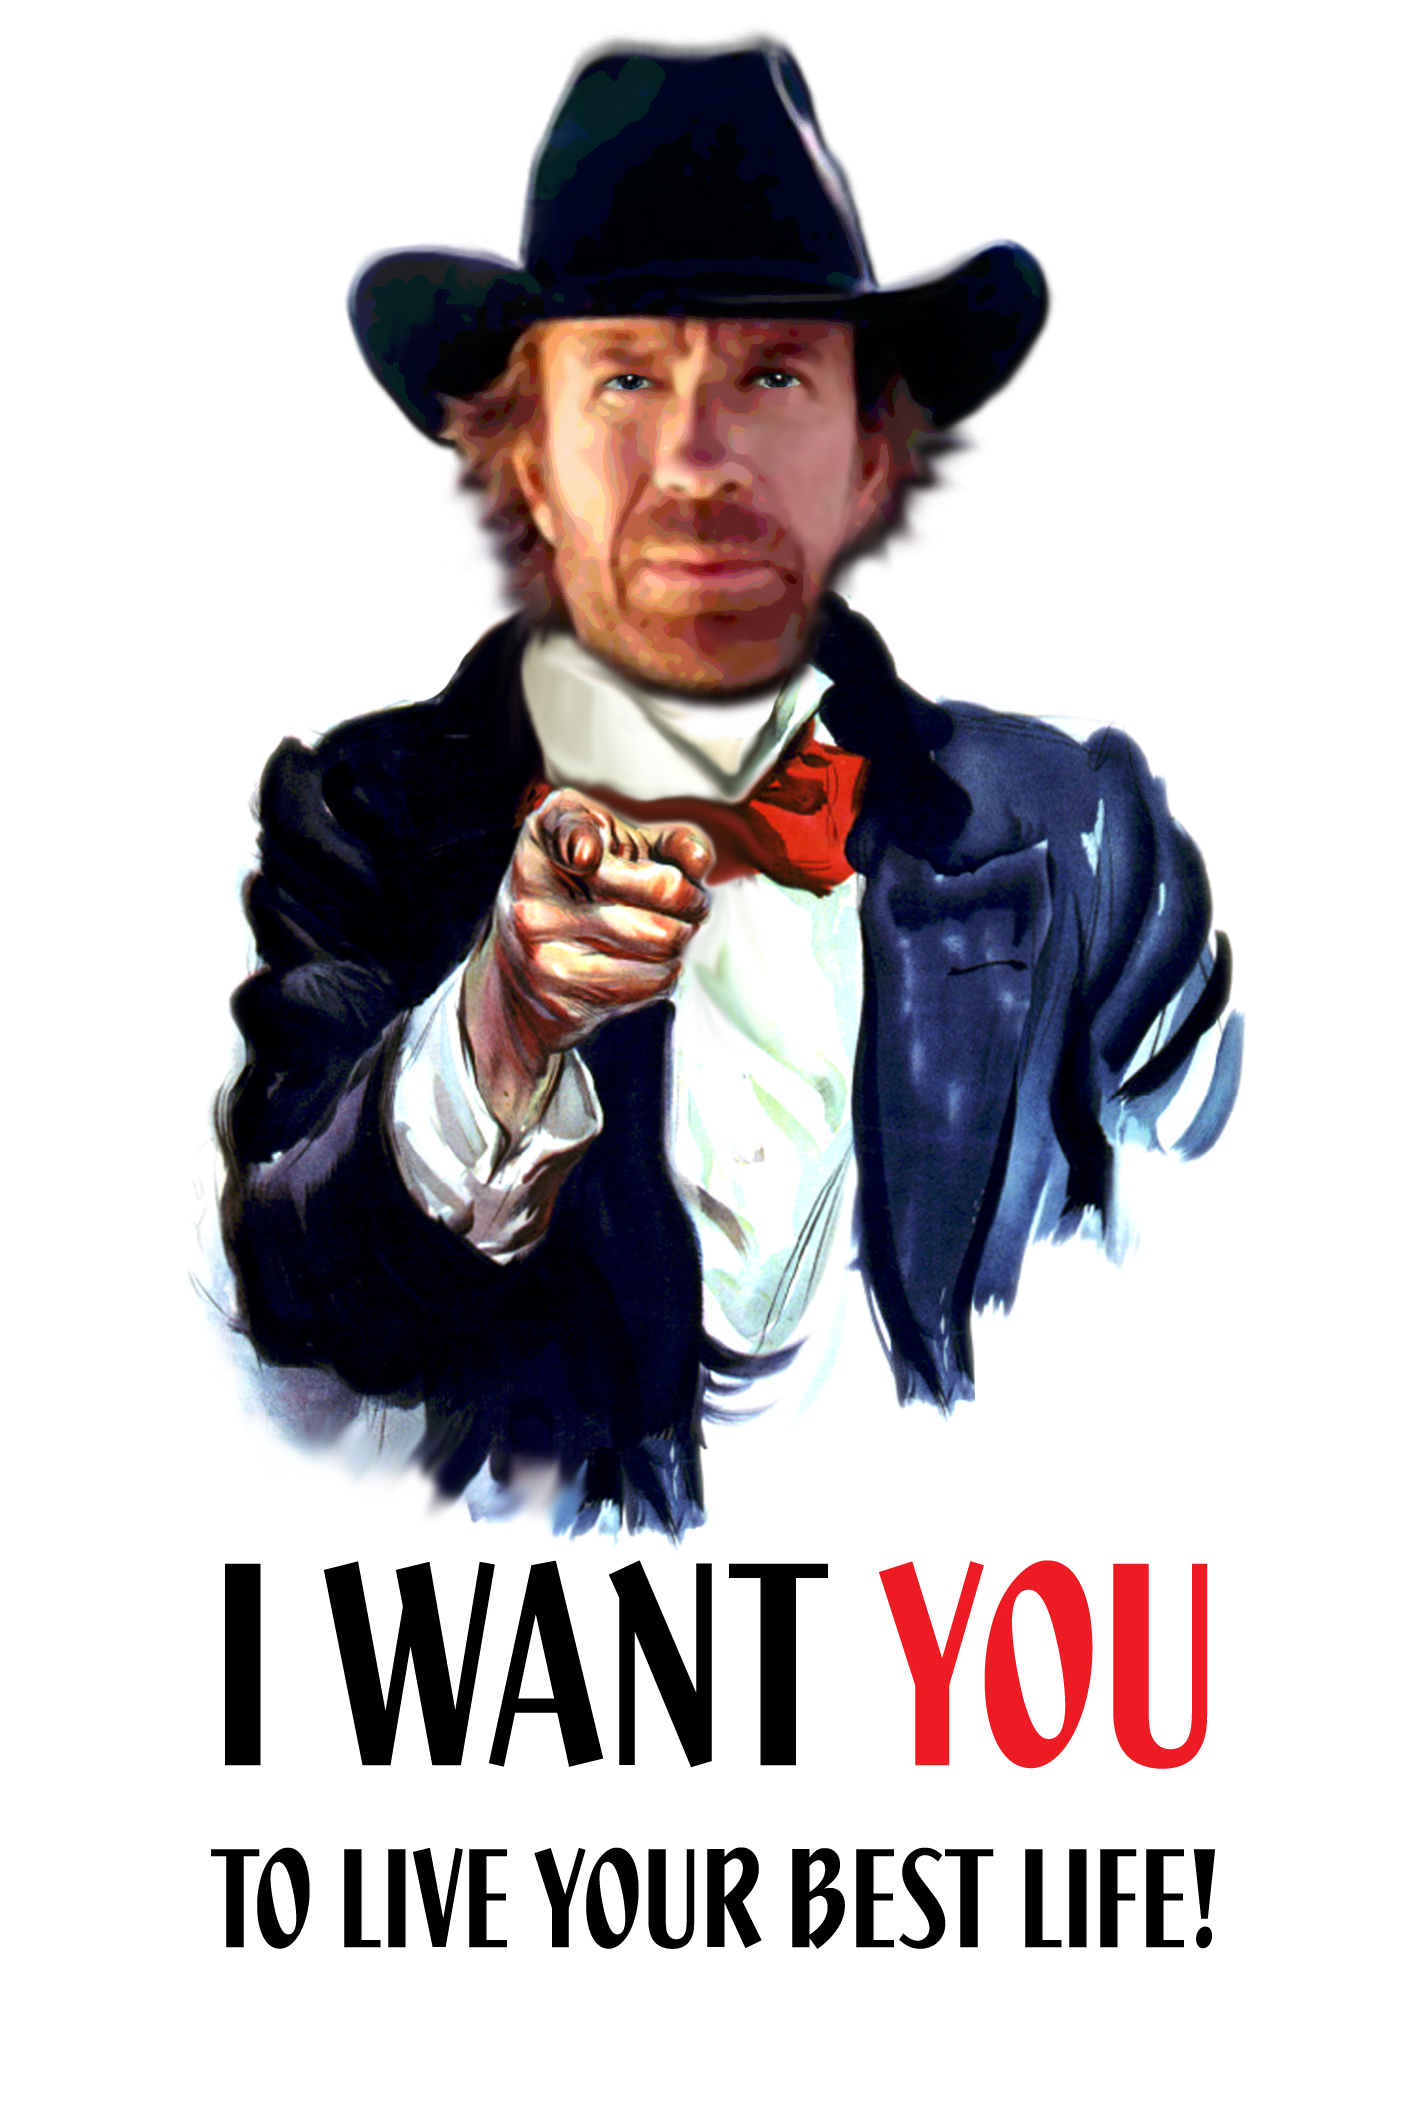 i want you wallpaper,poster,album cover,movie,font,photo caption